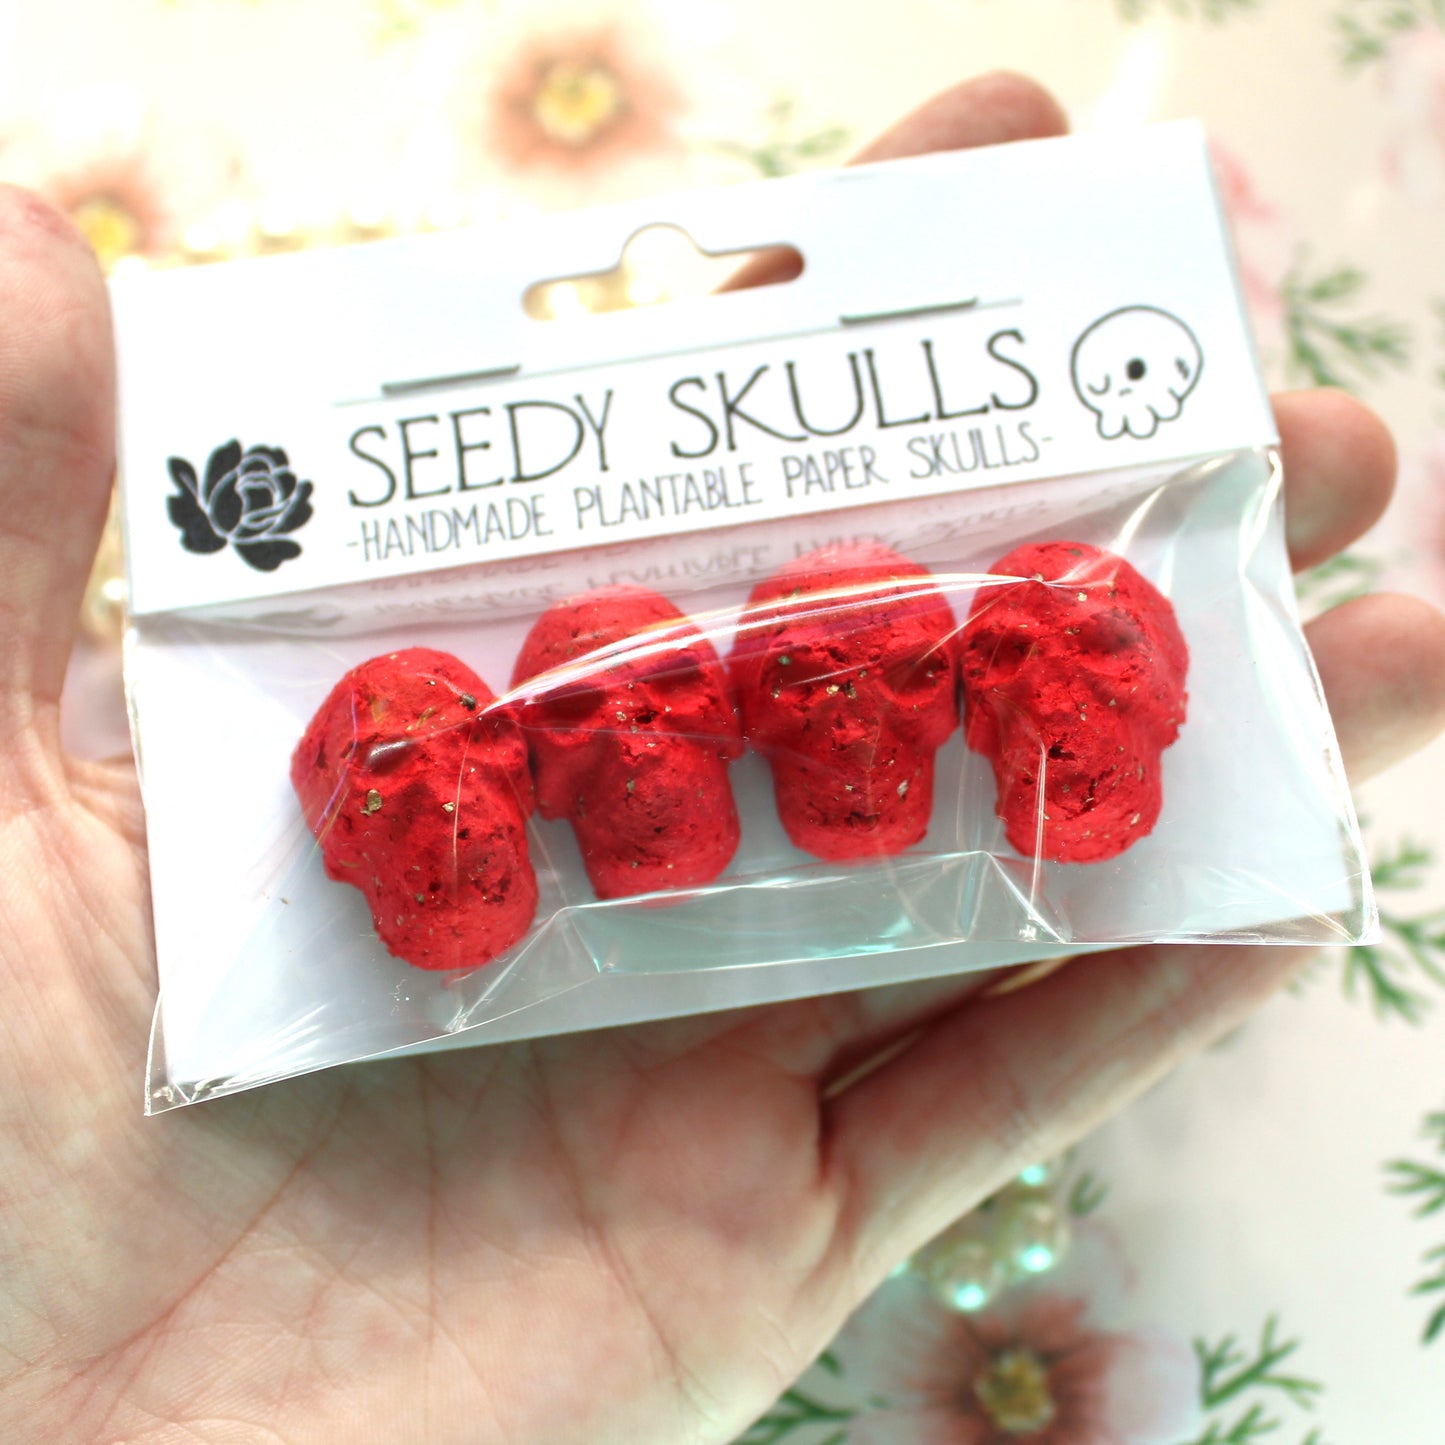 Red Plantable Paper Skulls / Seed Bombs / Seedy Skulls Pack / Recycled Paper Pulp Craft / Spring Summer Small Gift / Wild Flowers